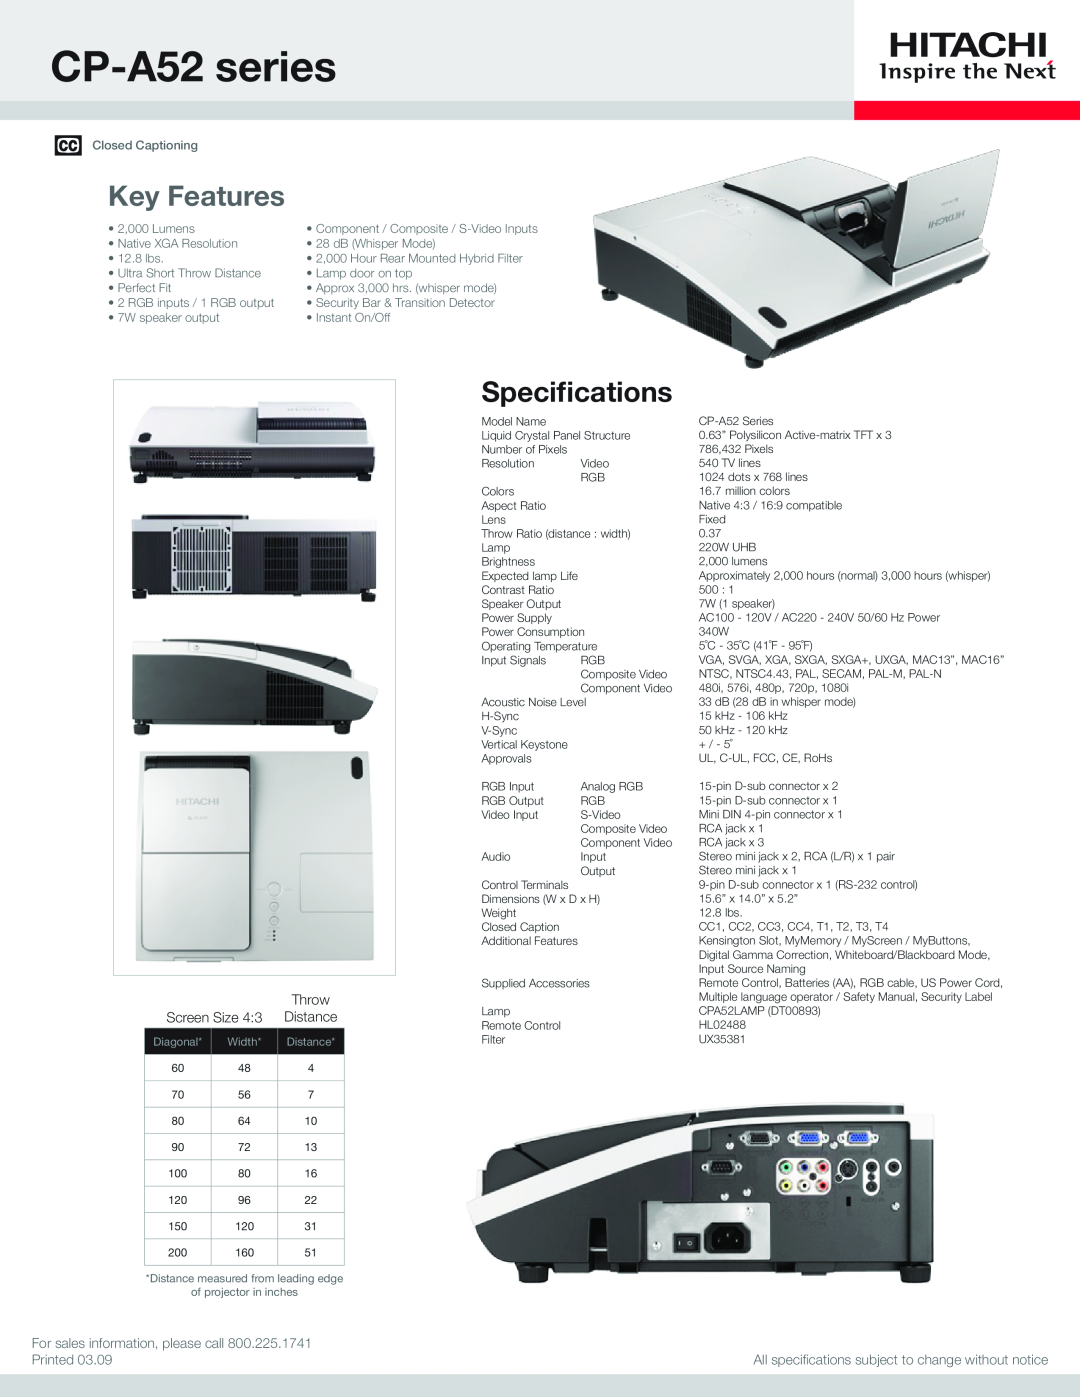 Hitachi specifications CP-A52series, Key Features, Specifications, Screen Size, Throw, Distance, Printed, Diagonal 